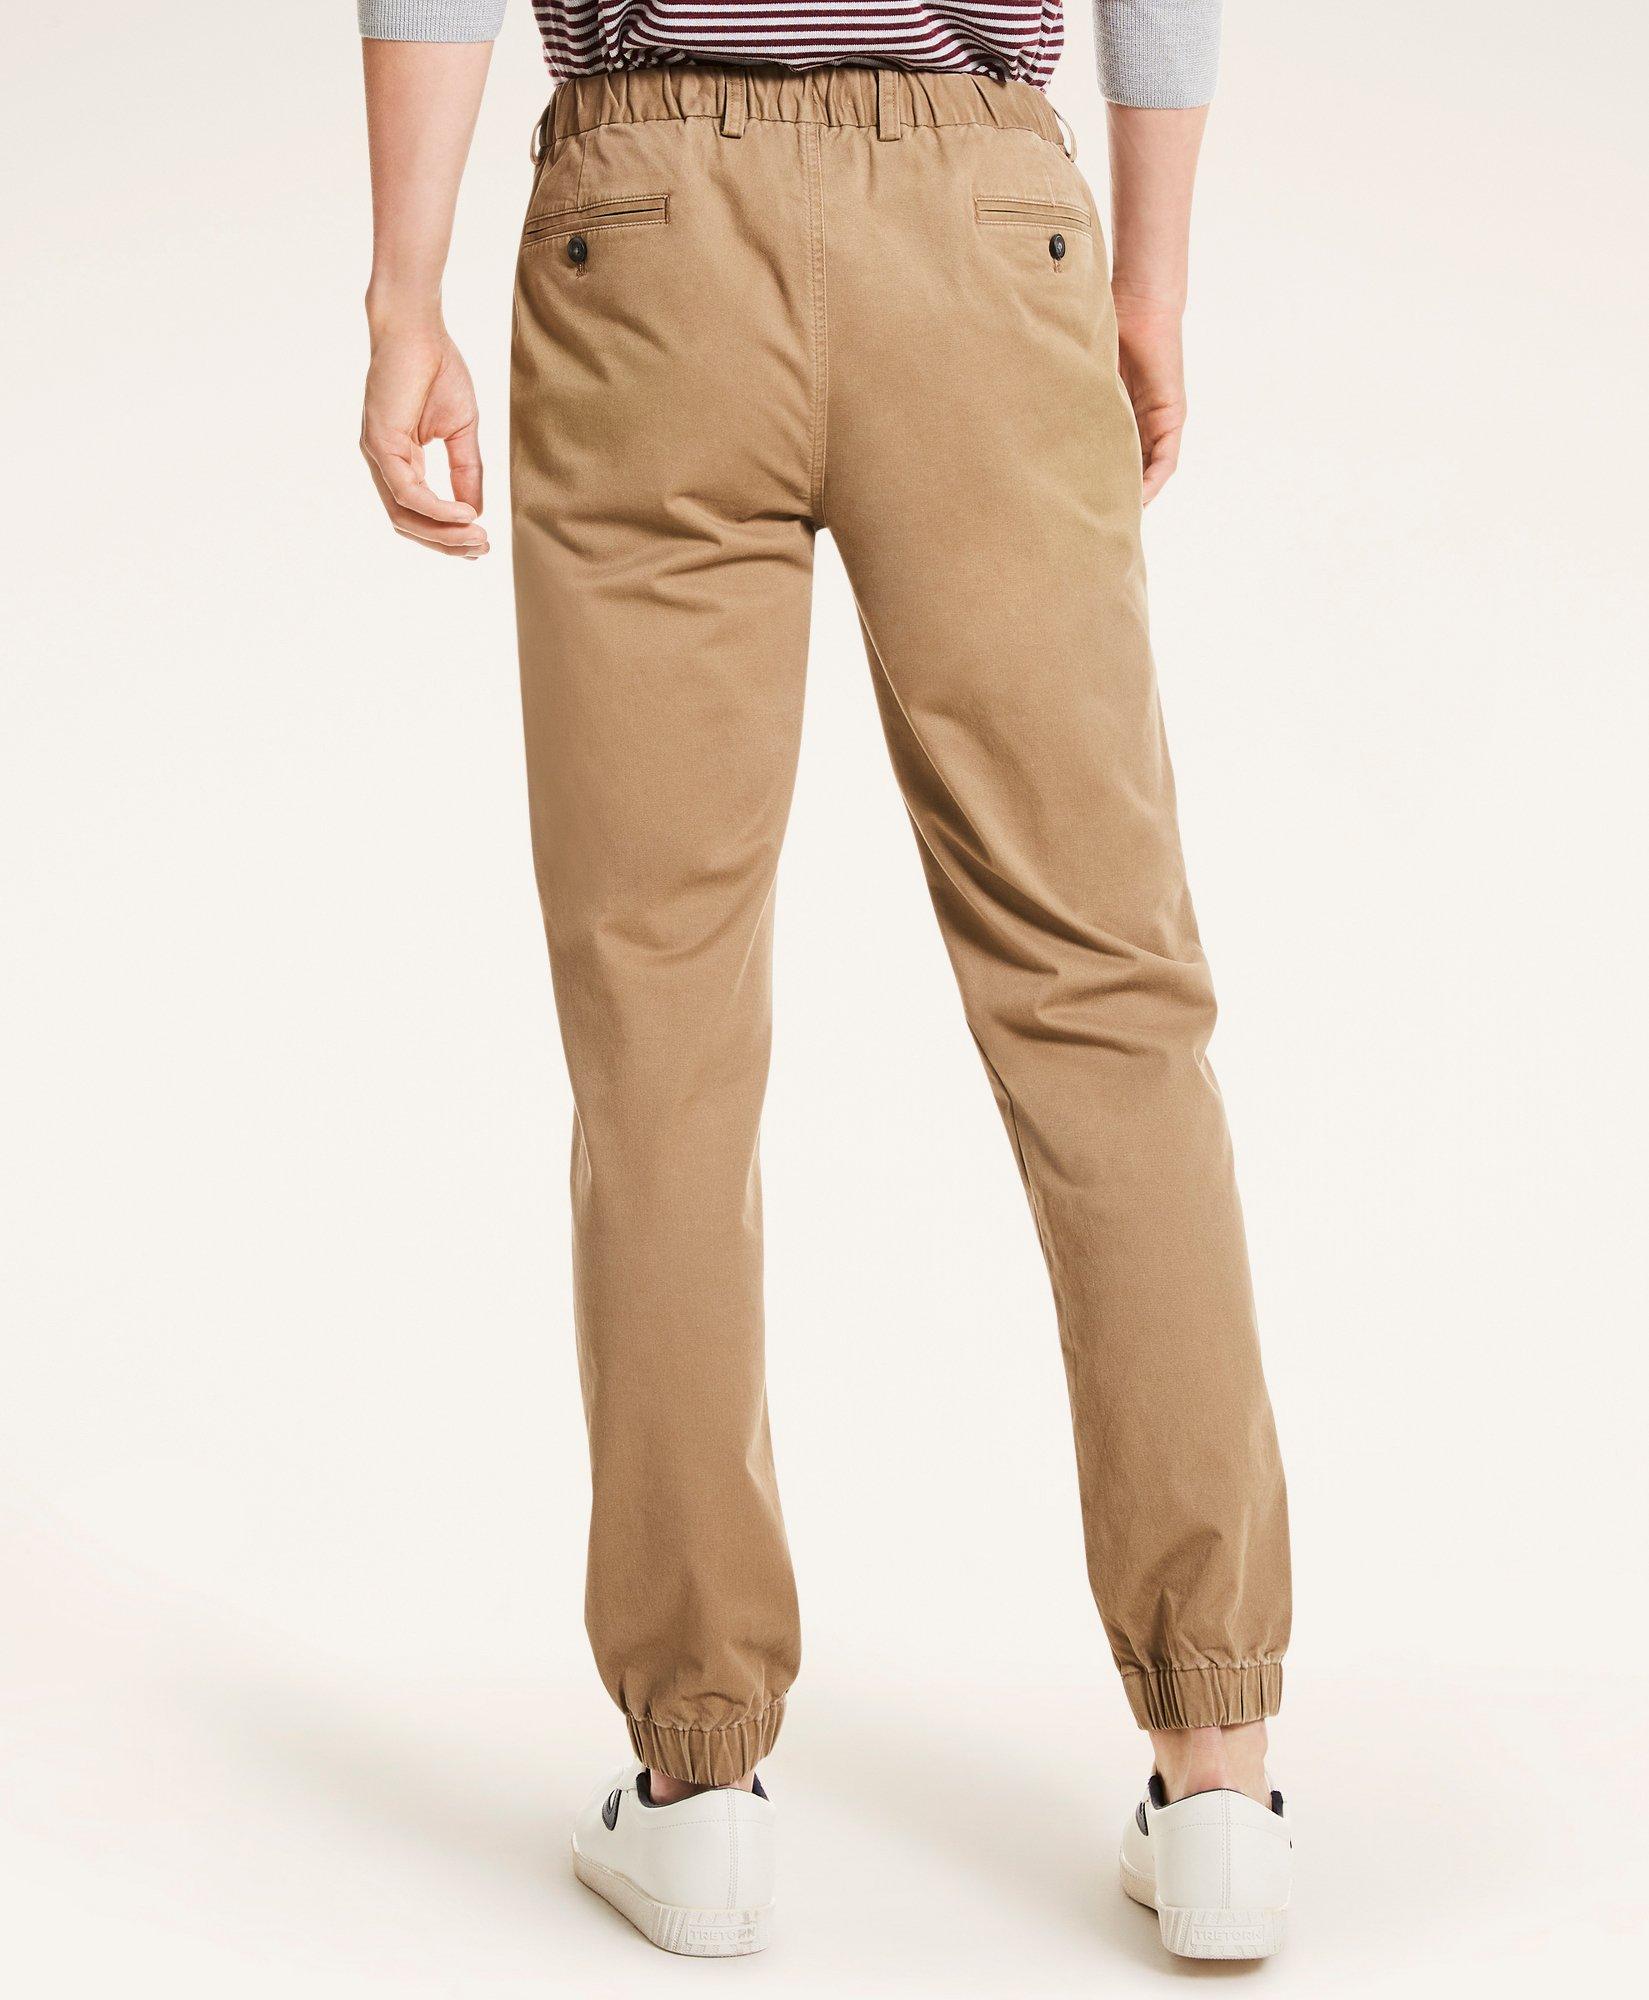 Twill Joggers for Men